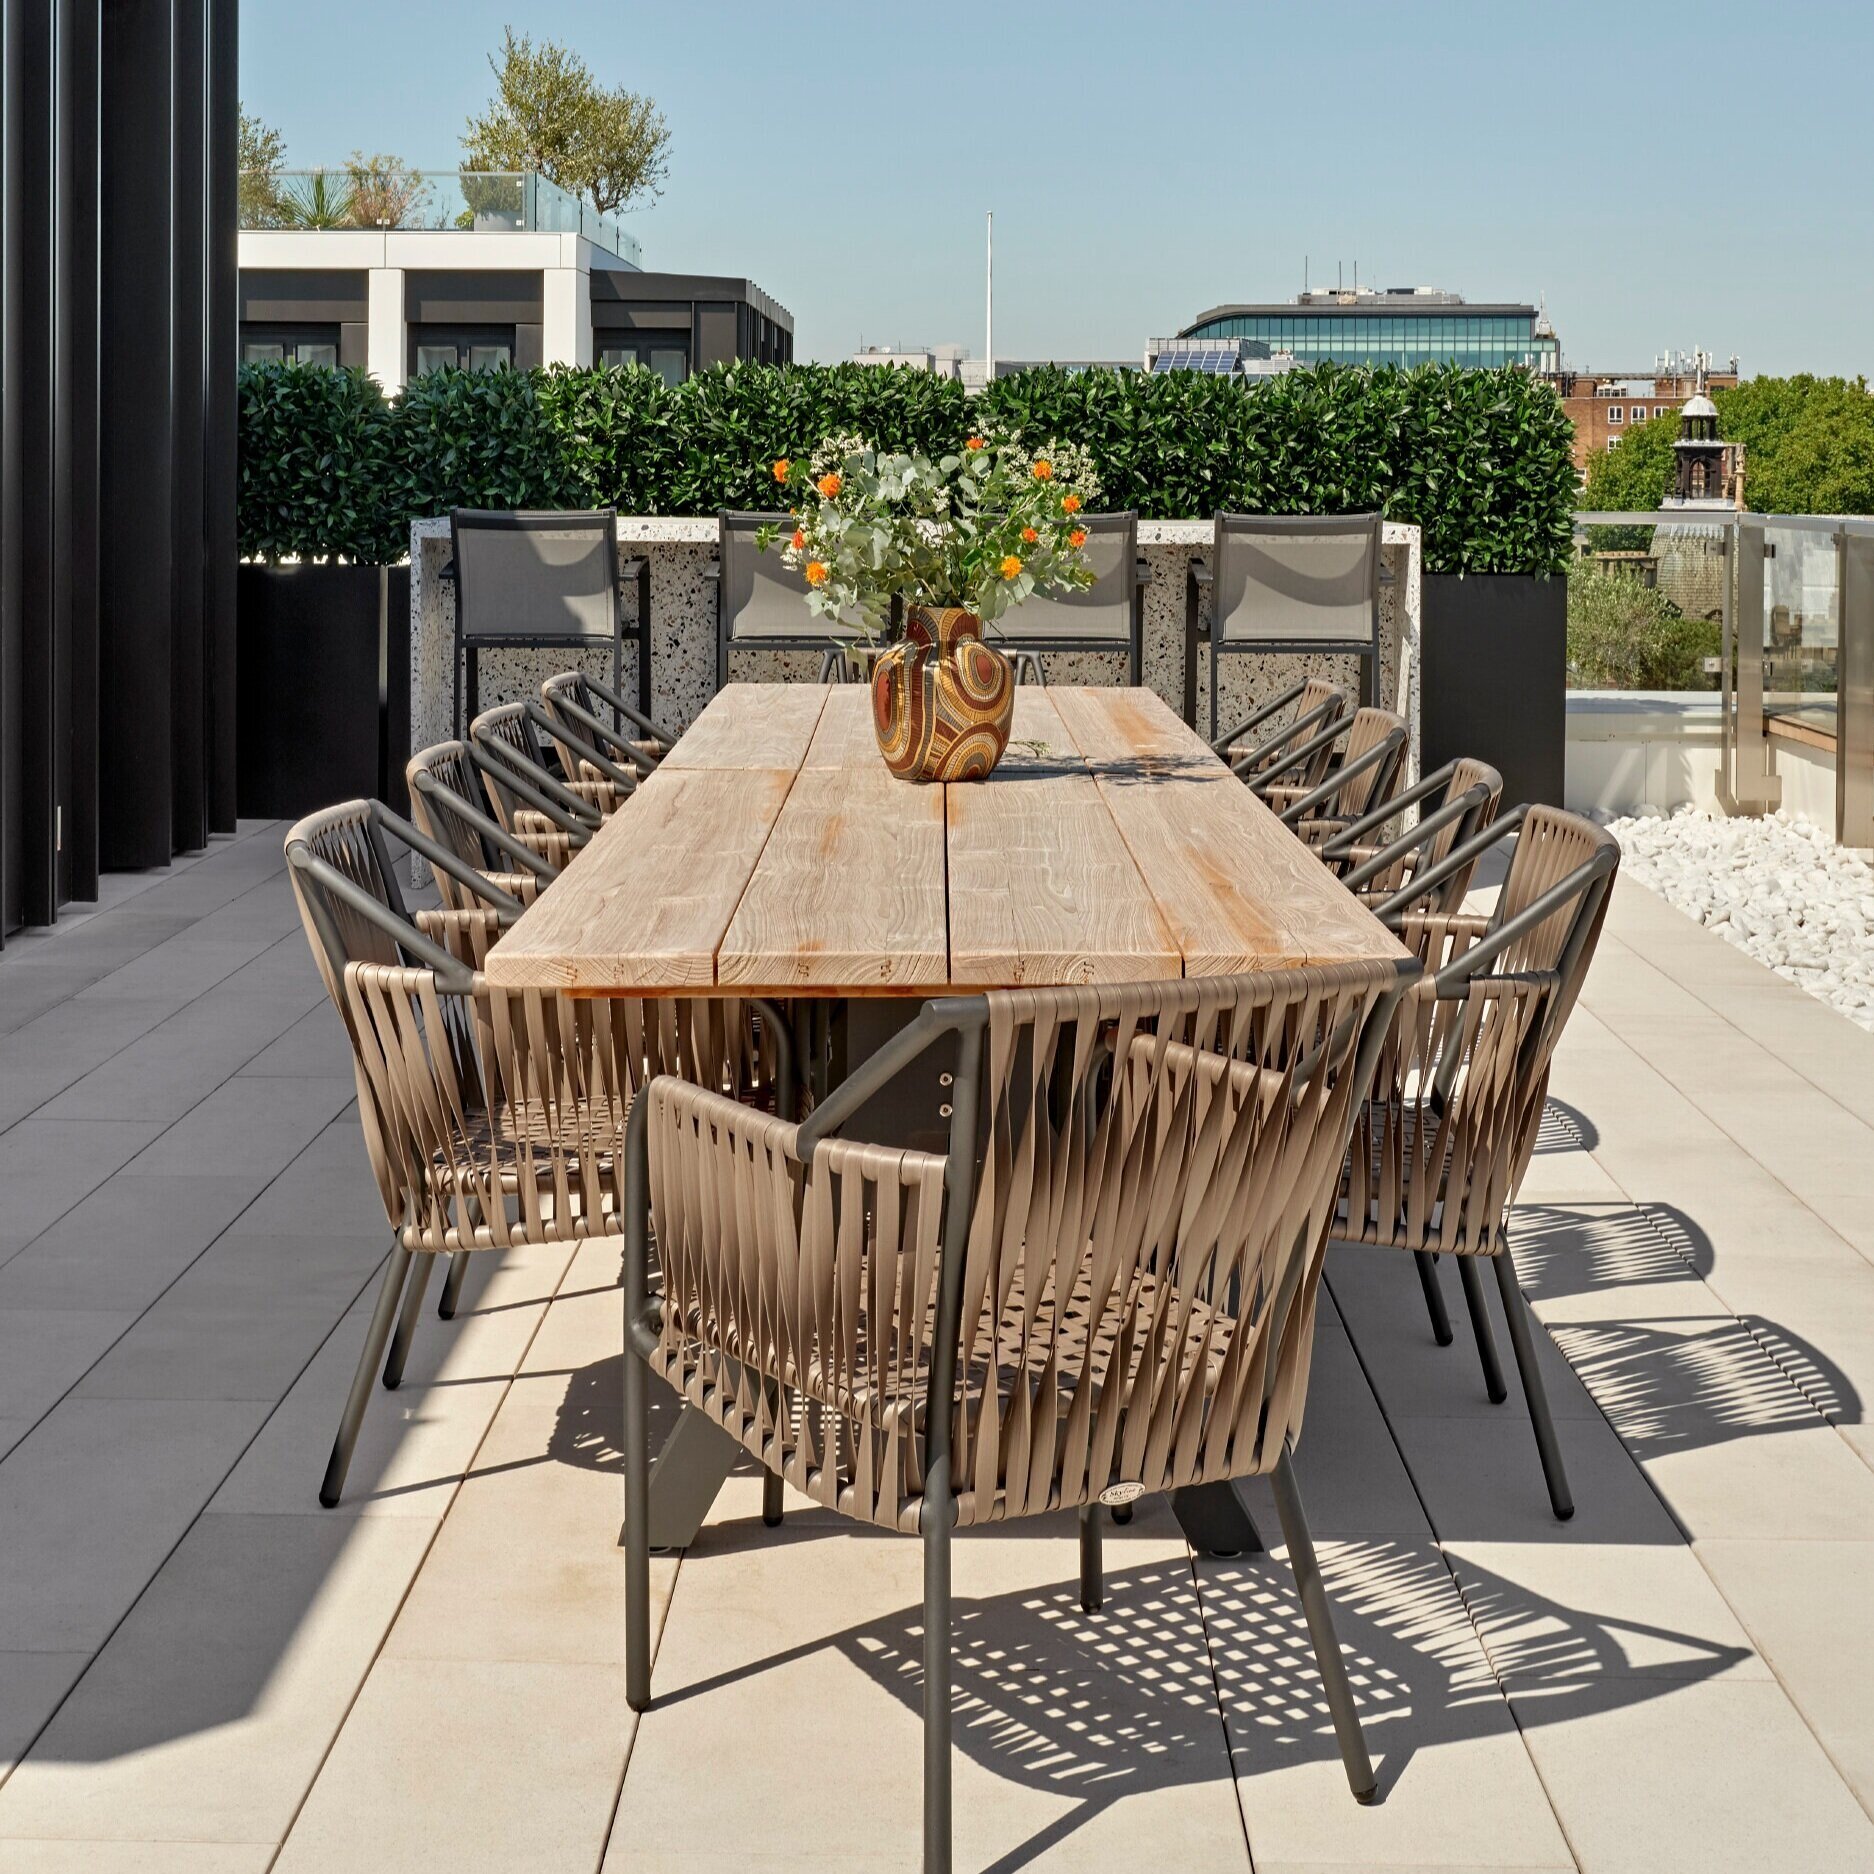 knight_frank_interiors_lincoln_square_luxury_interior_design_show_homes_4_outdoor_terrace.jpg